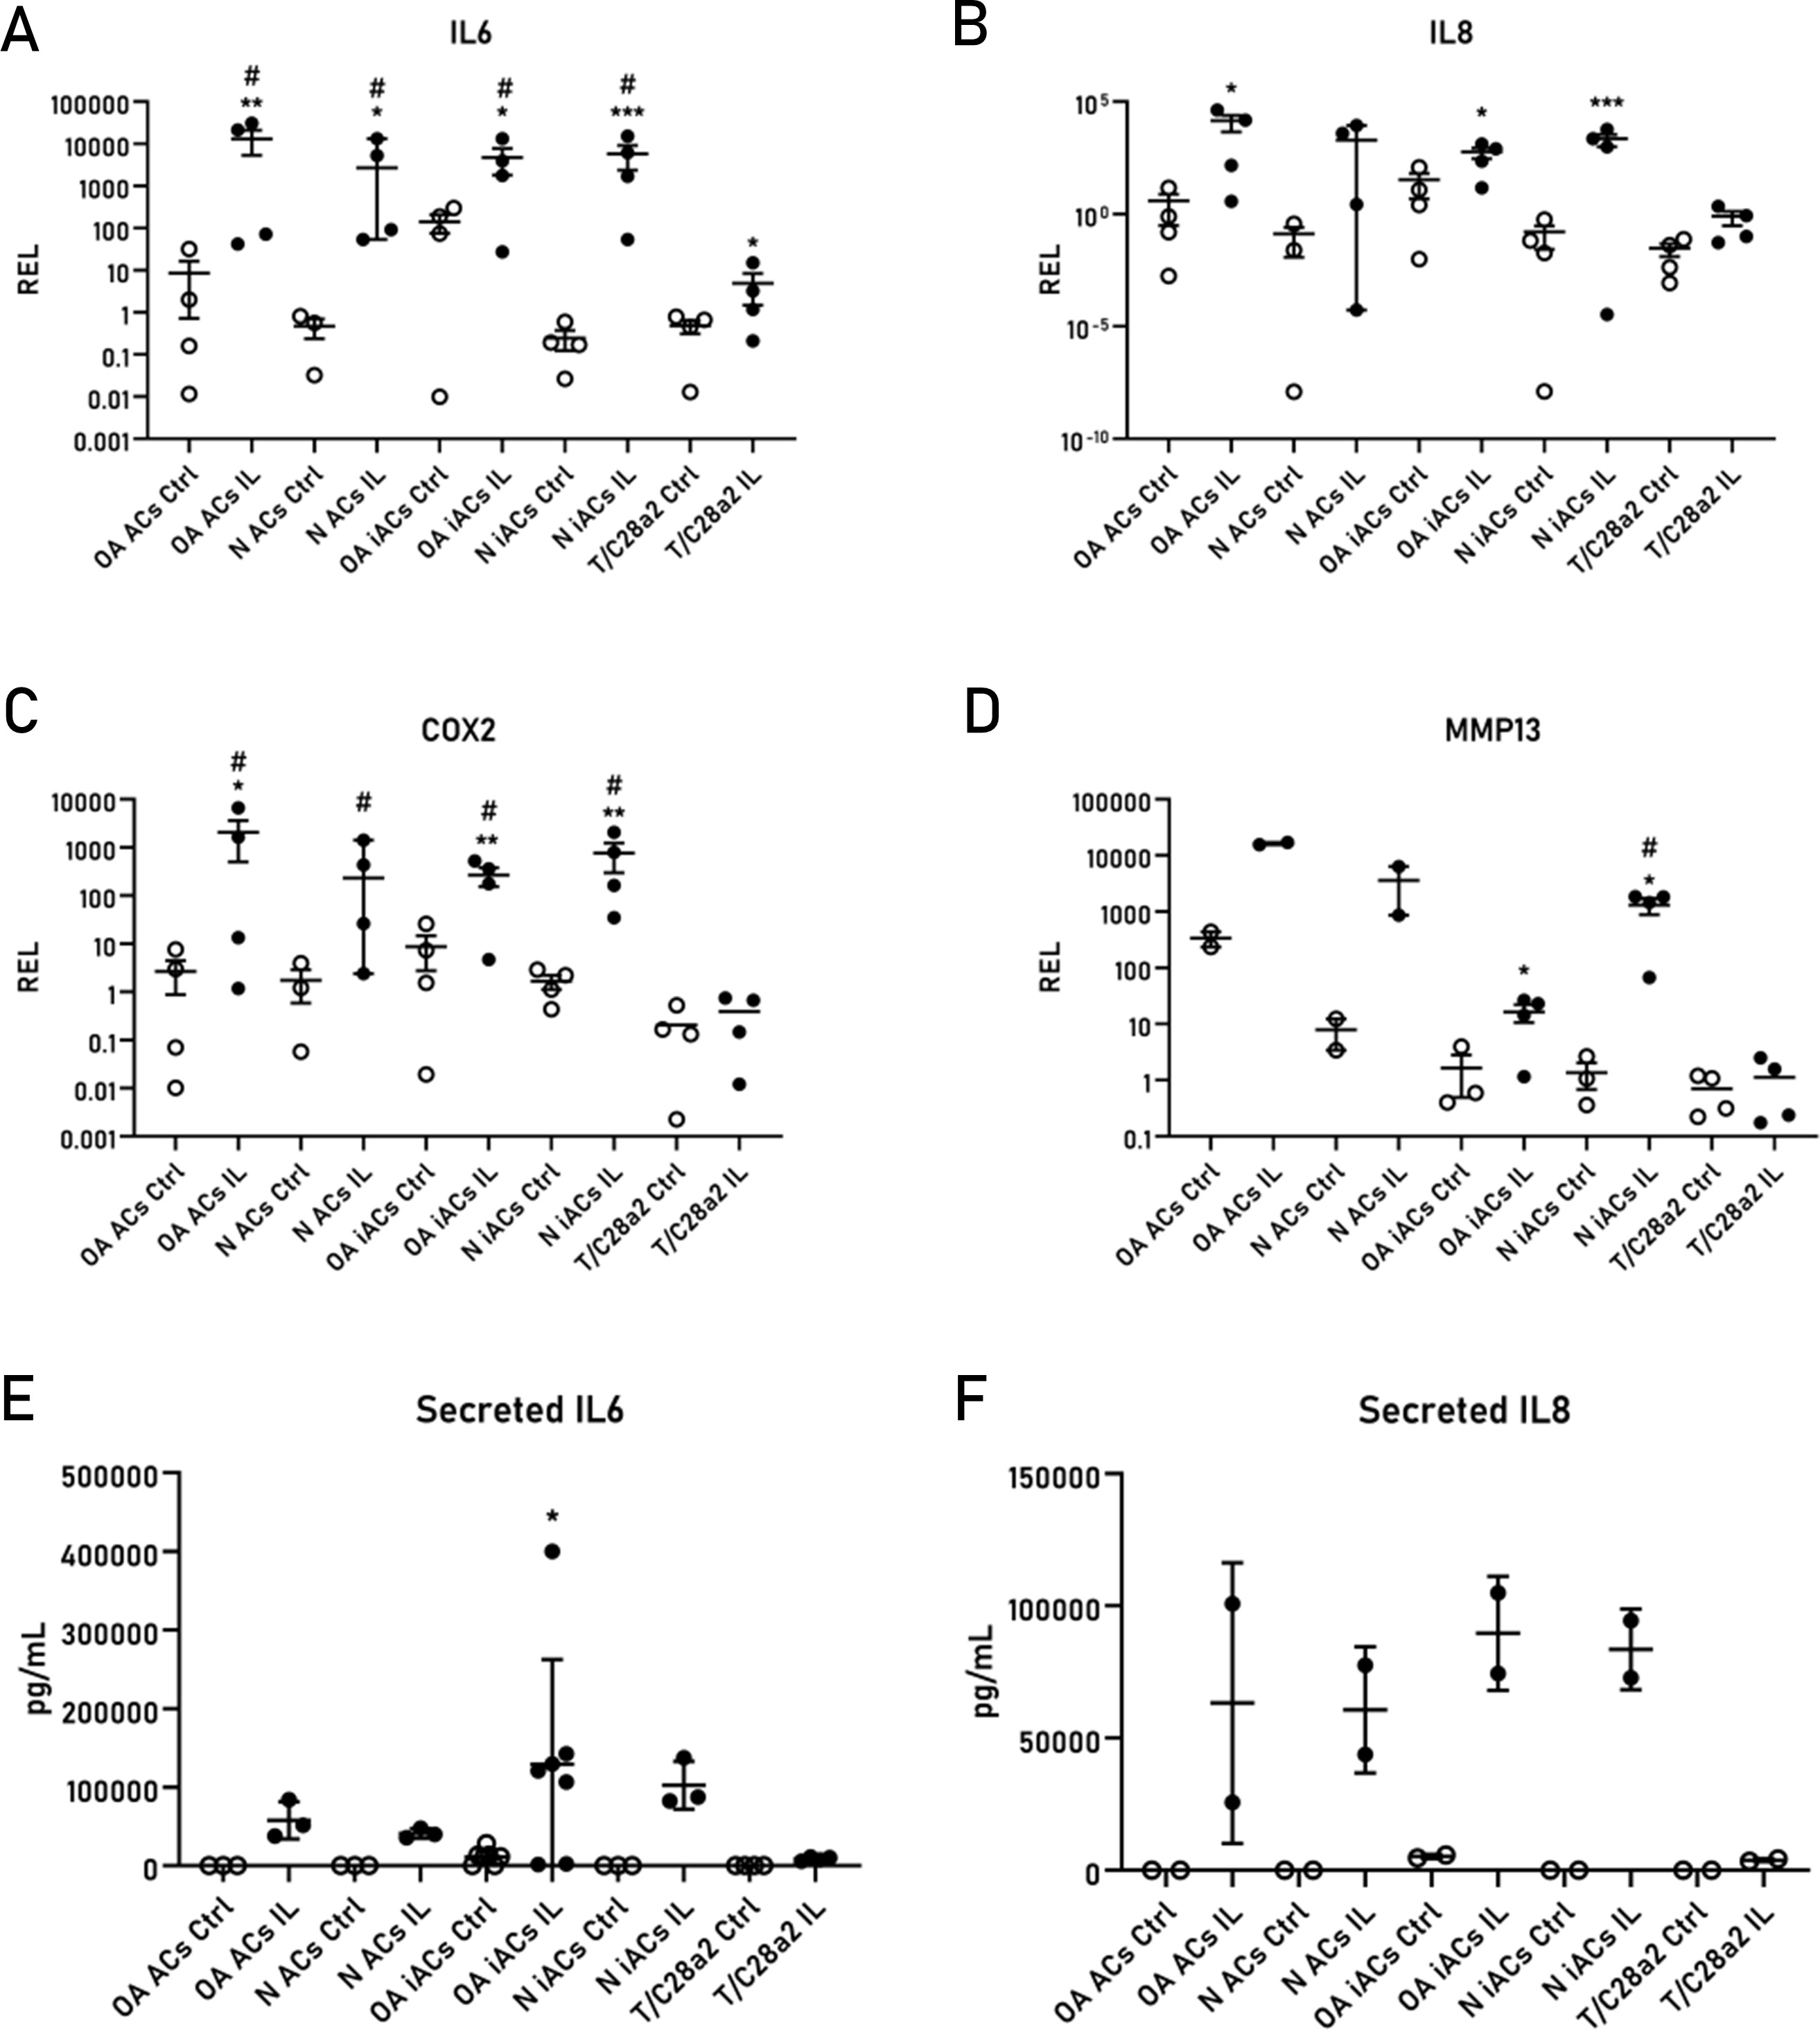 Fig. 4 
          Relative expression levels (RELs) of a) interleukin (IL)-6, b) IL-8, c) cyclooxygenase-2 (COX2), and d) matrix metalloproteinase 13 (MMP-13) in osteoarthritic primary articular chondrocytes (OA ACs), non-OA primary articular chondrocytes (N ACs), OA immortalized articular chondrocytes (OA iACs), non-OA immortalized articular chondrocytes (N iACs), and T/C28a2 cells after 24-hour treatment with IL-1β. Levels of e) secreted IL-6 and f) IL-8 in culture supernatants from OA ACs, N ACs, OA iACs, N iACs, and T/C28a2 cells after 24-hour treatment with IL-1β. *p ≤ 0.05, Mann-Whitney U test.
        